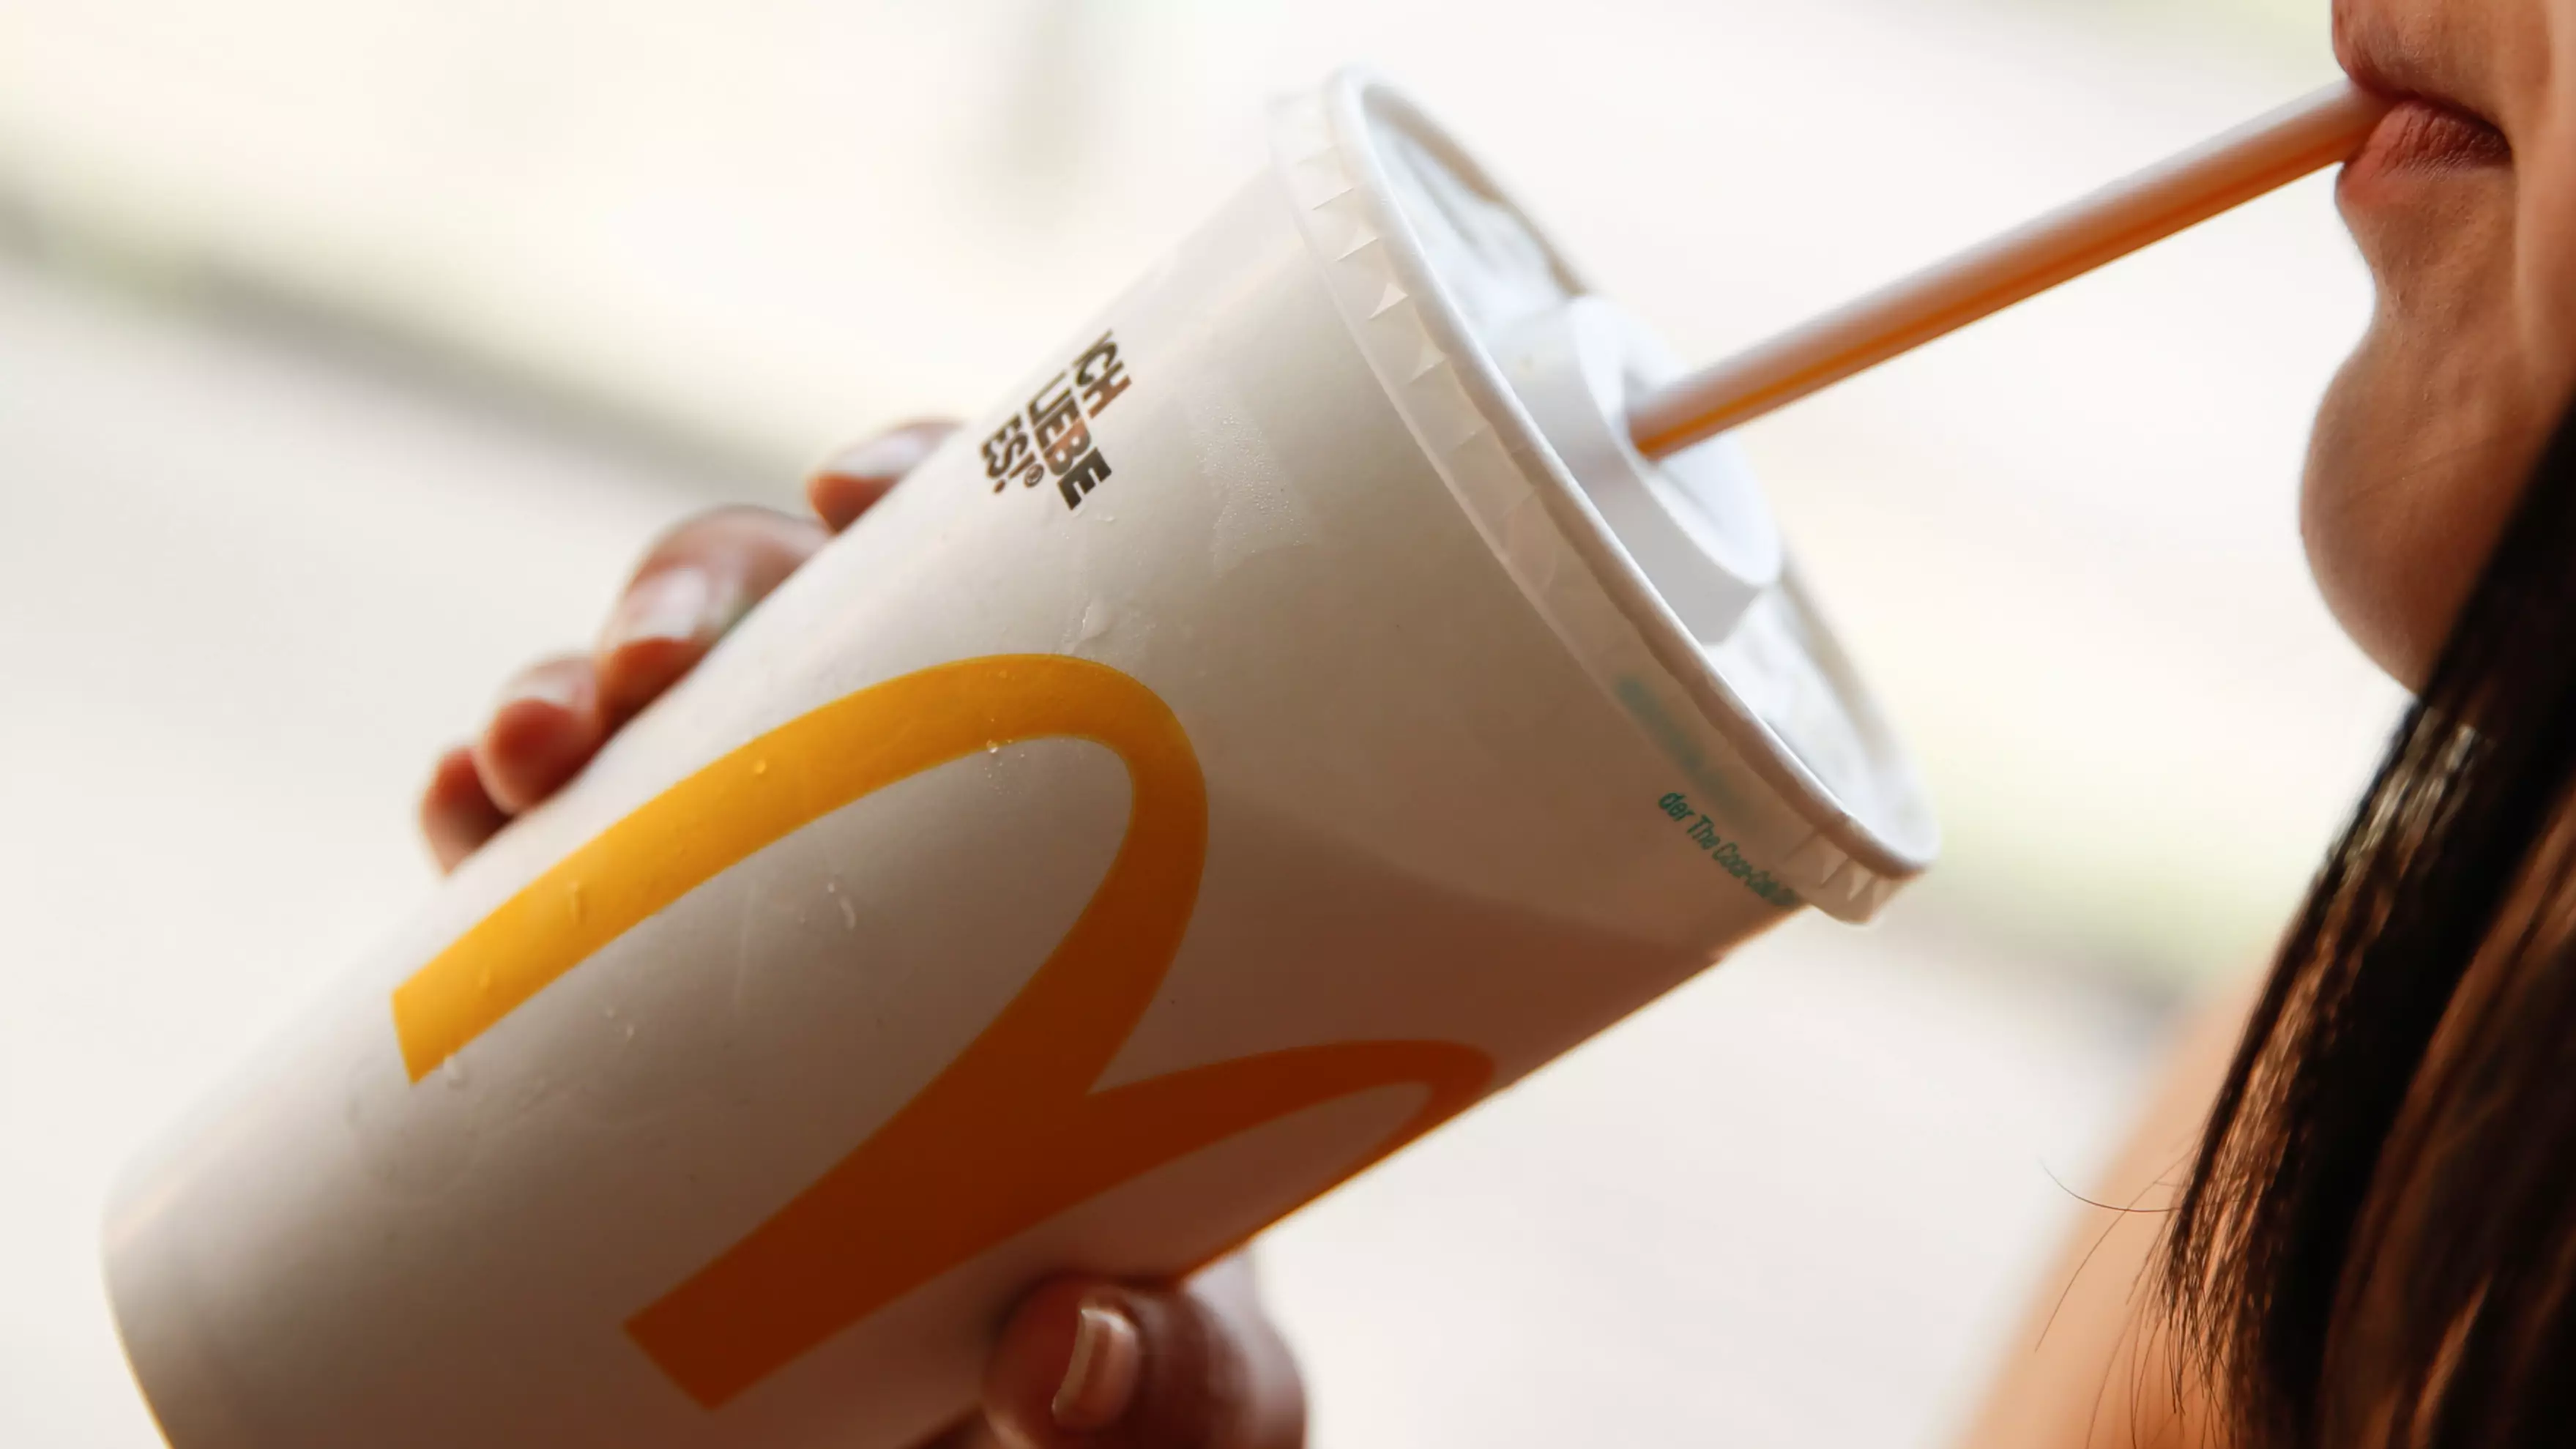 McDonald's Paper Straws Are Not Yet Recyclable, According To Leaked Memo